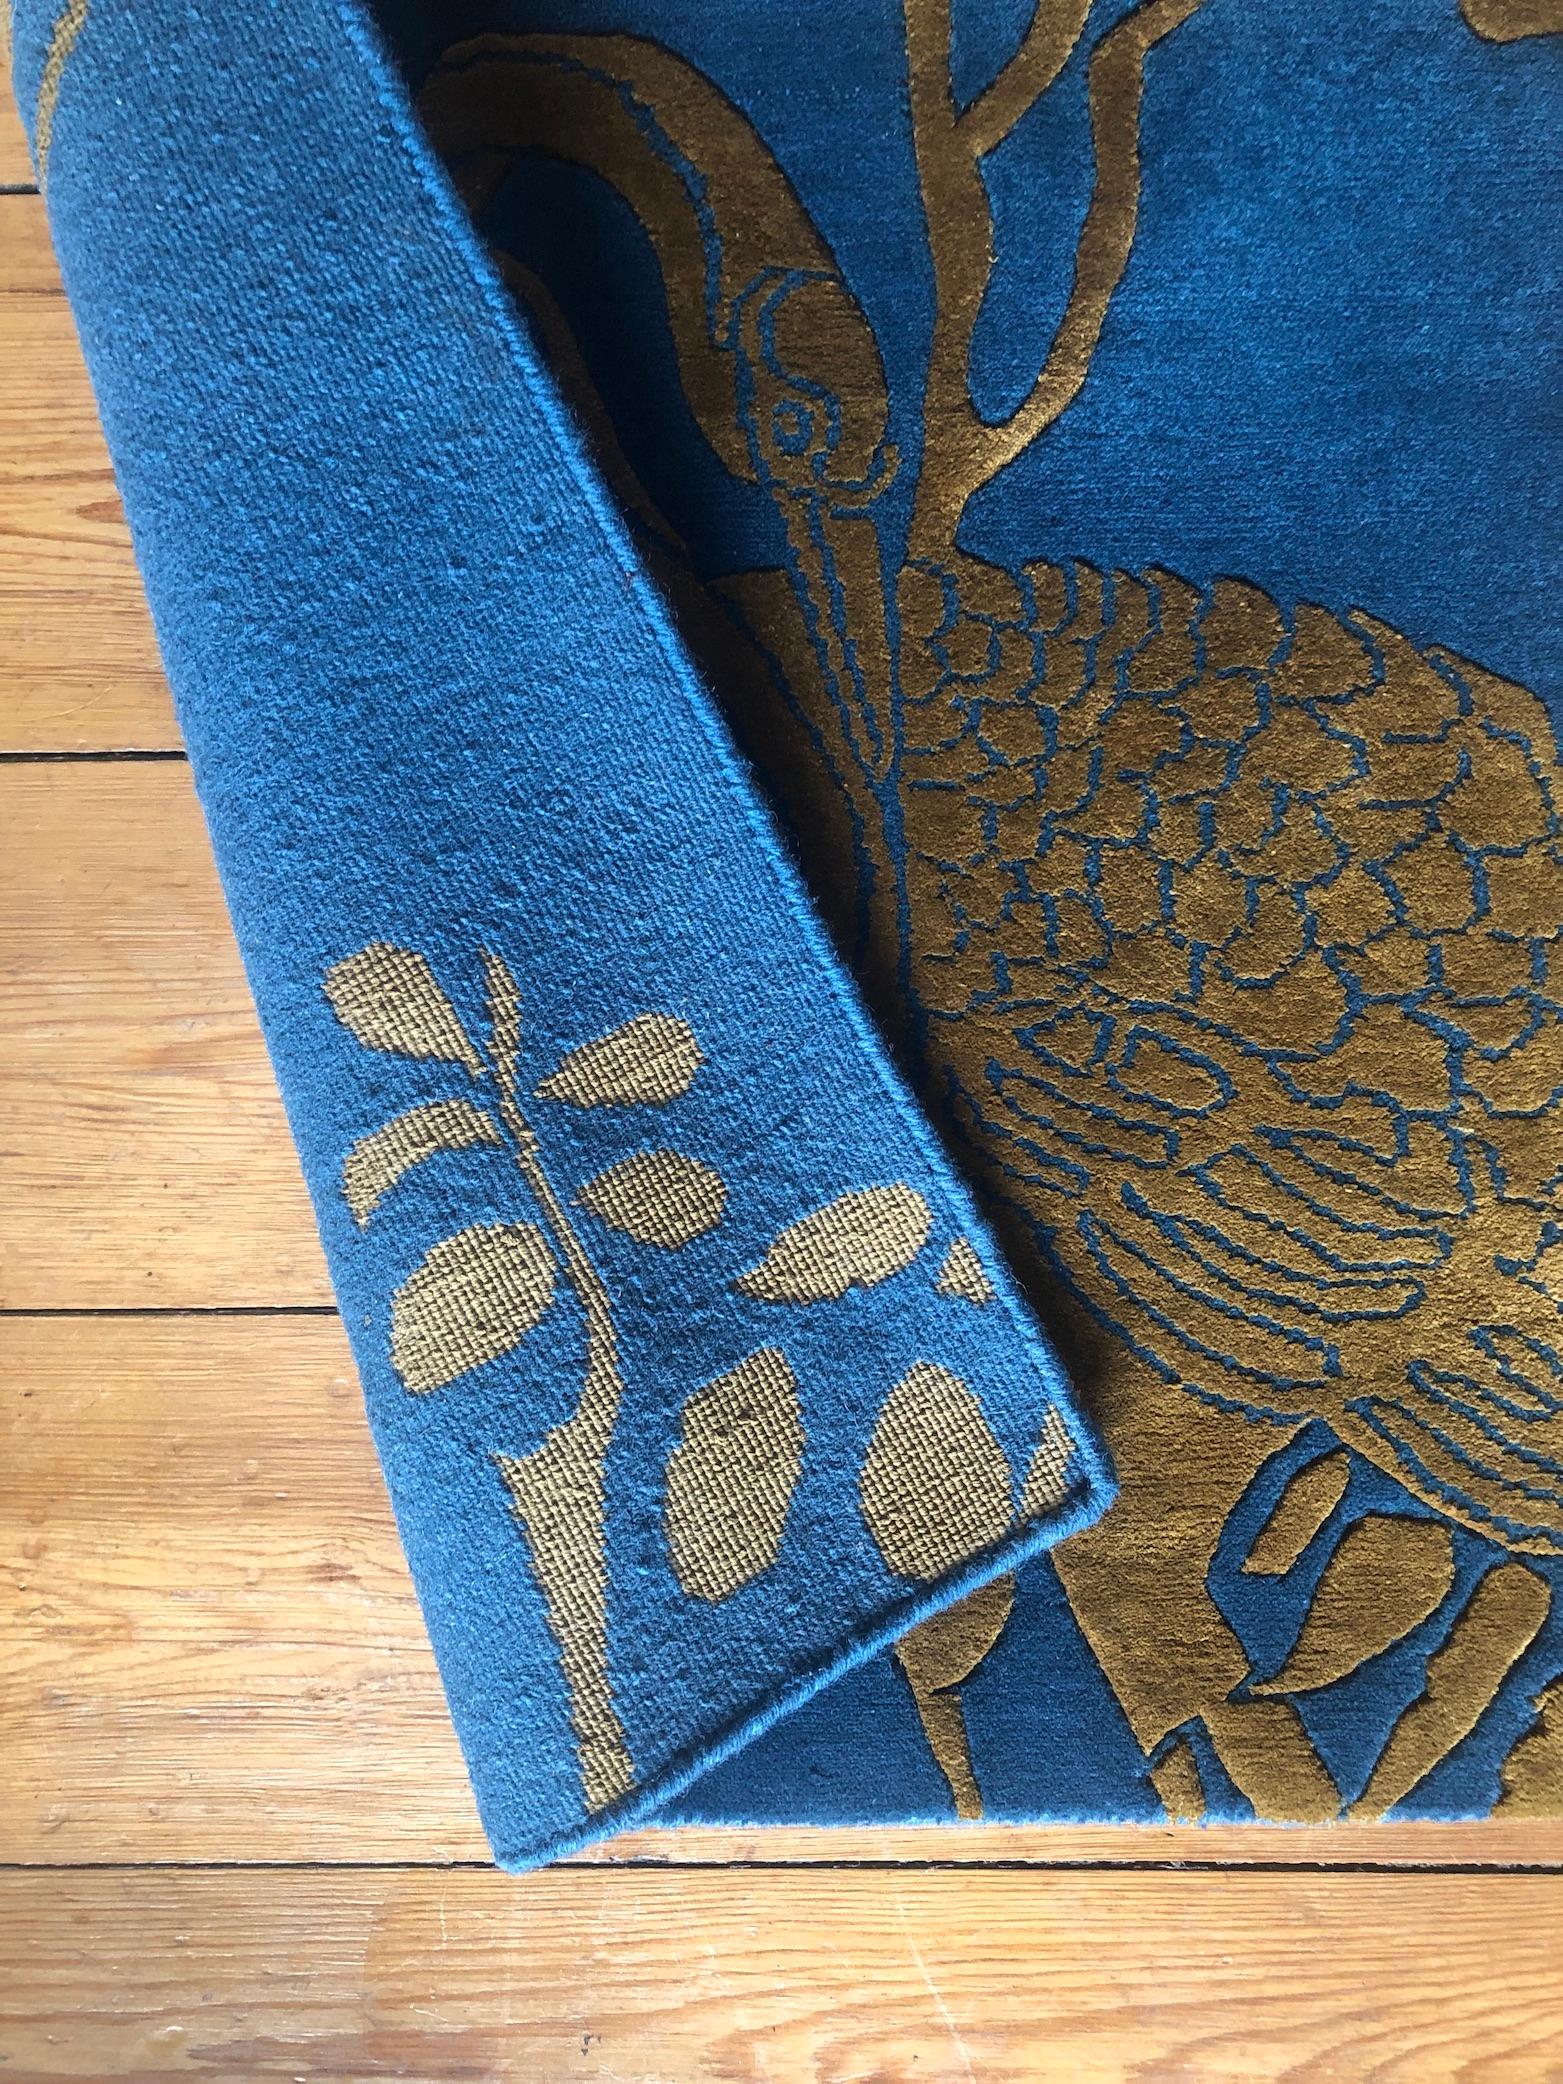 Jardin de Chinois is a hand knotted wool and silk rug by Scottish designer Wendy Morrison. The rug is handcrafted in India using only the finest wool and silk and is Goodweave certified, meaning you can be confident that no child labour has been